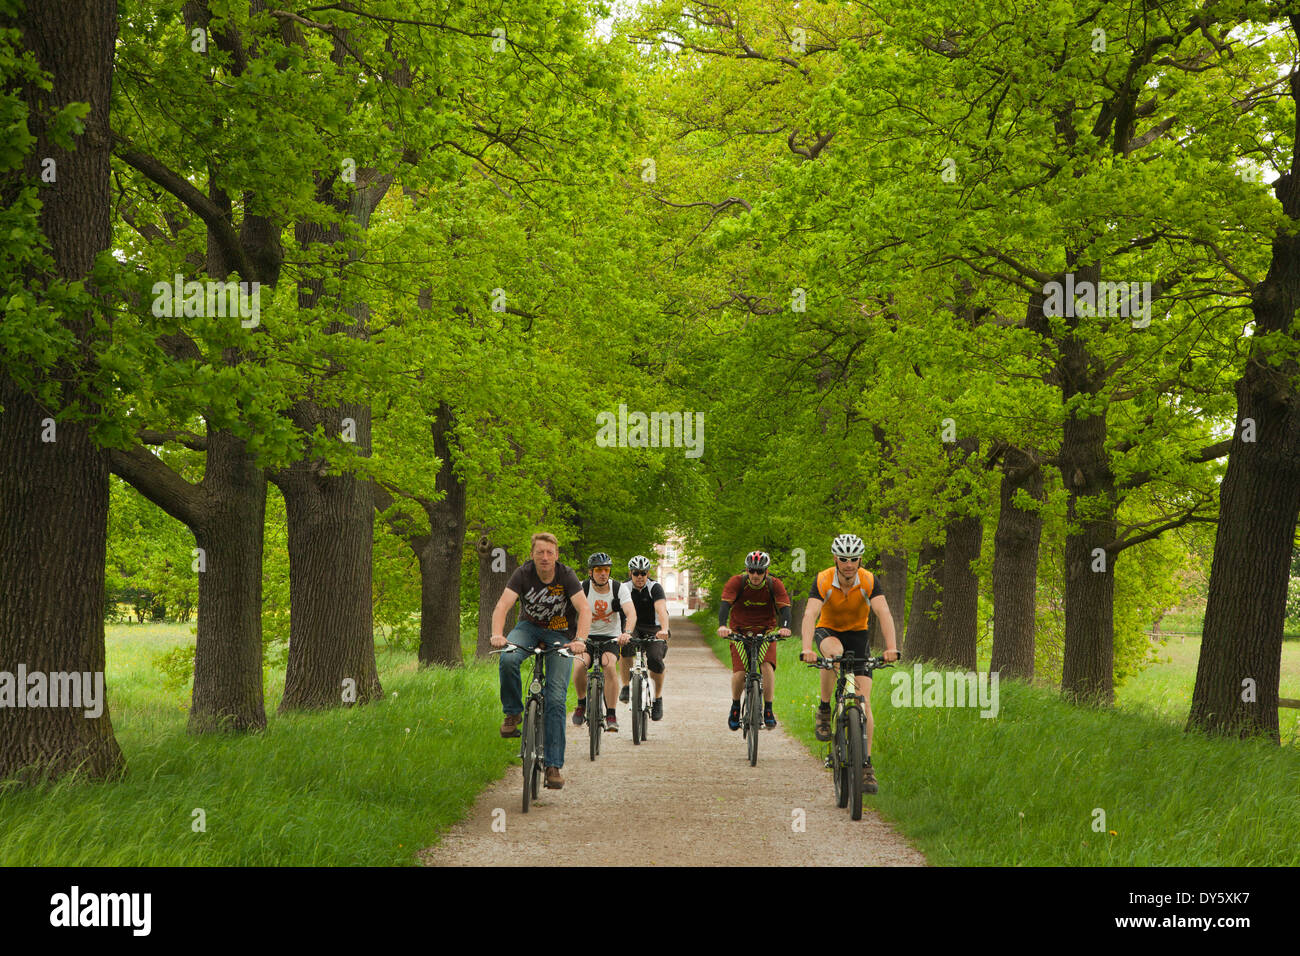 Cyclists in an alley of oaks, Muensterland, North Rhine-Westphalia, Germany, Europe Stock Photo